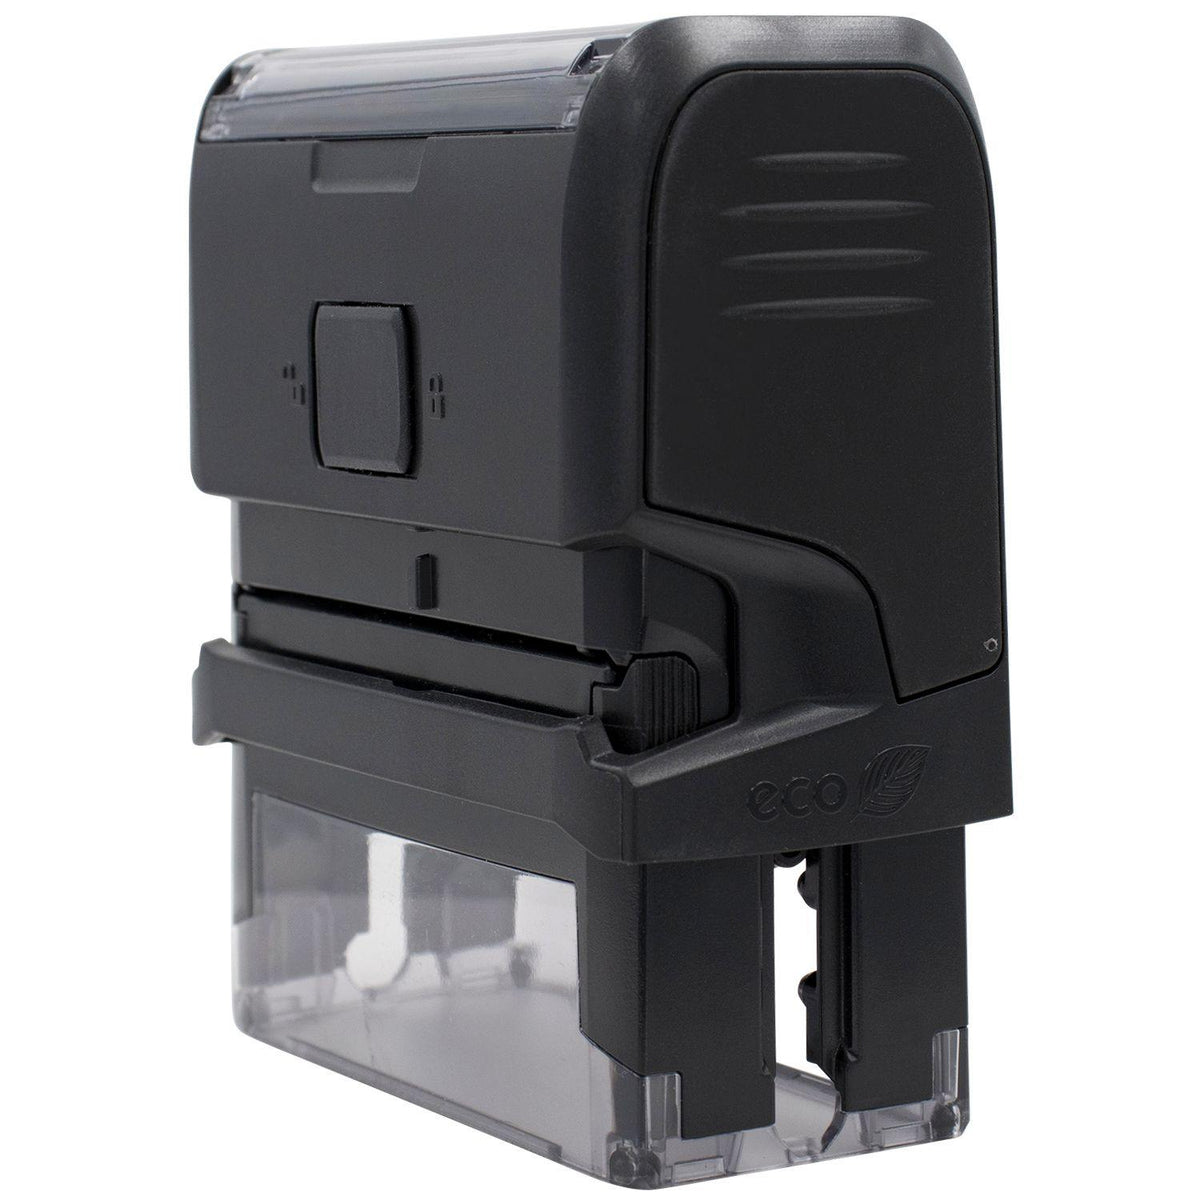 Large Self-Inking Please Review with your child Stamp - Engineer Seal Stamps - Brand_Trodat, Impression Size_Large, Stamp Type_Self-Inking Stamp, Type of Use_Teacher